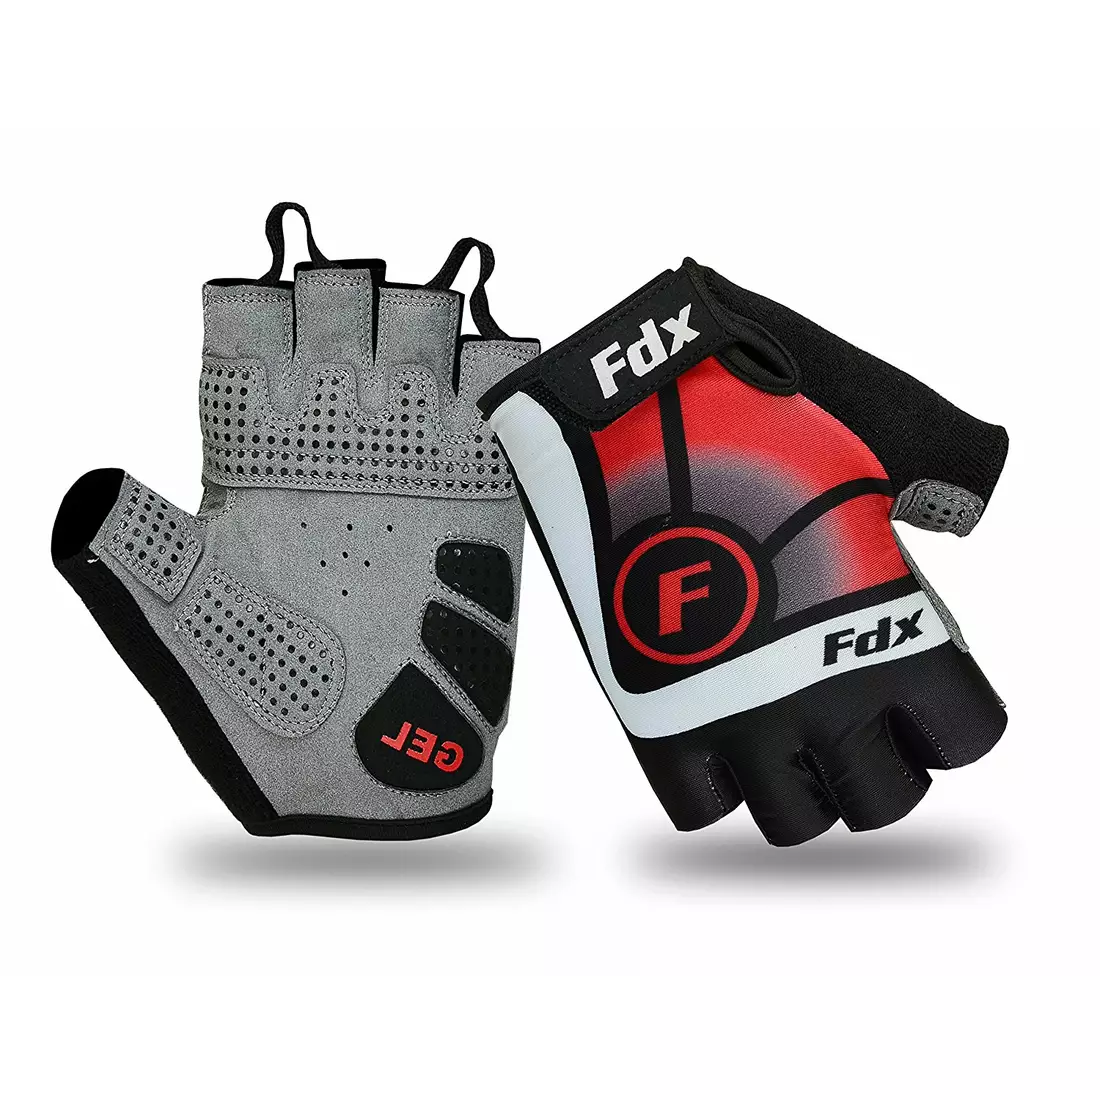 FDX 1020 red bicycle gloves